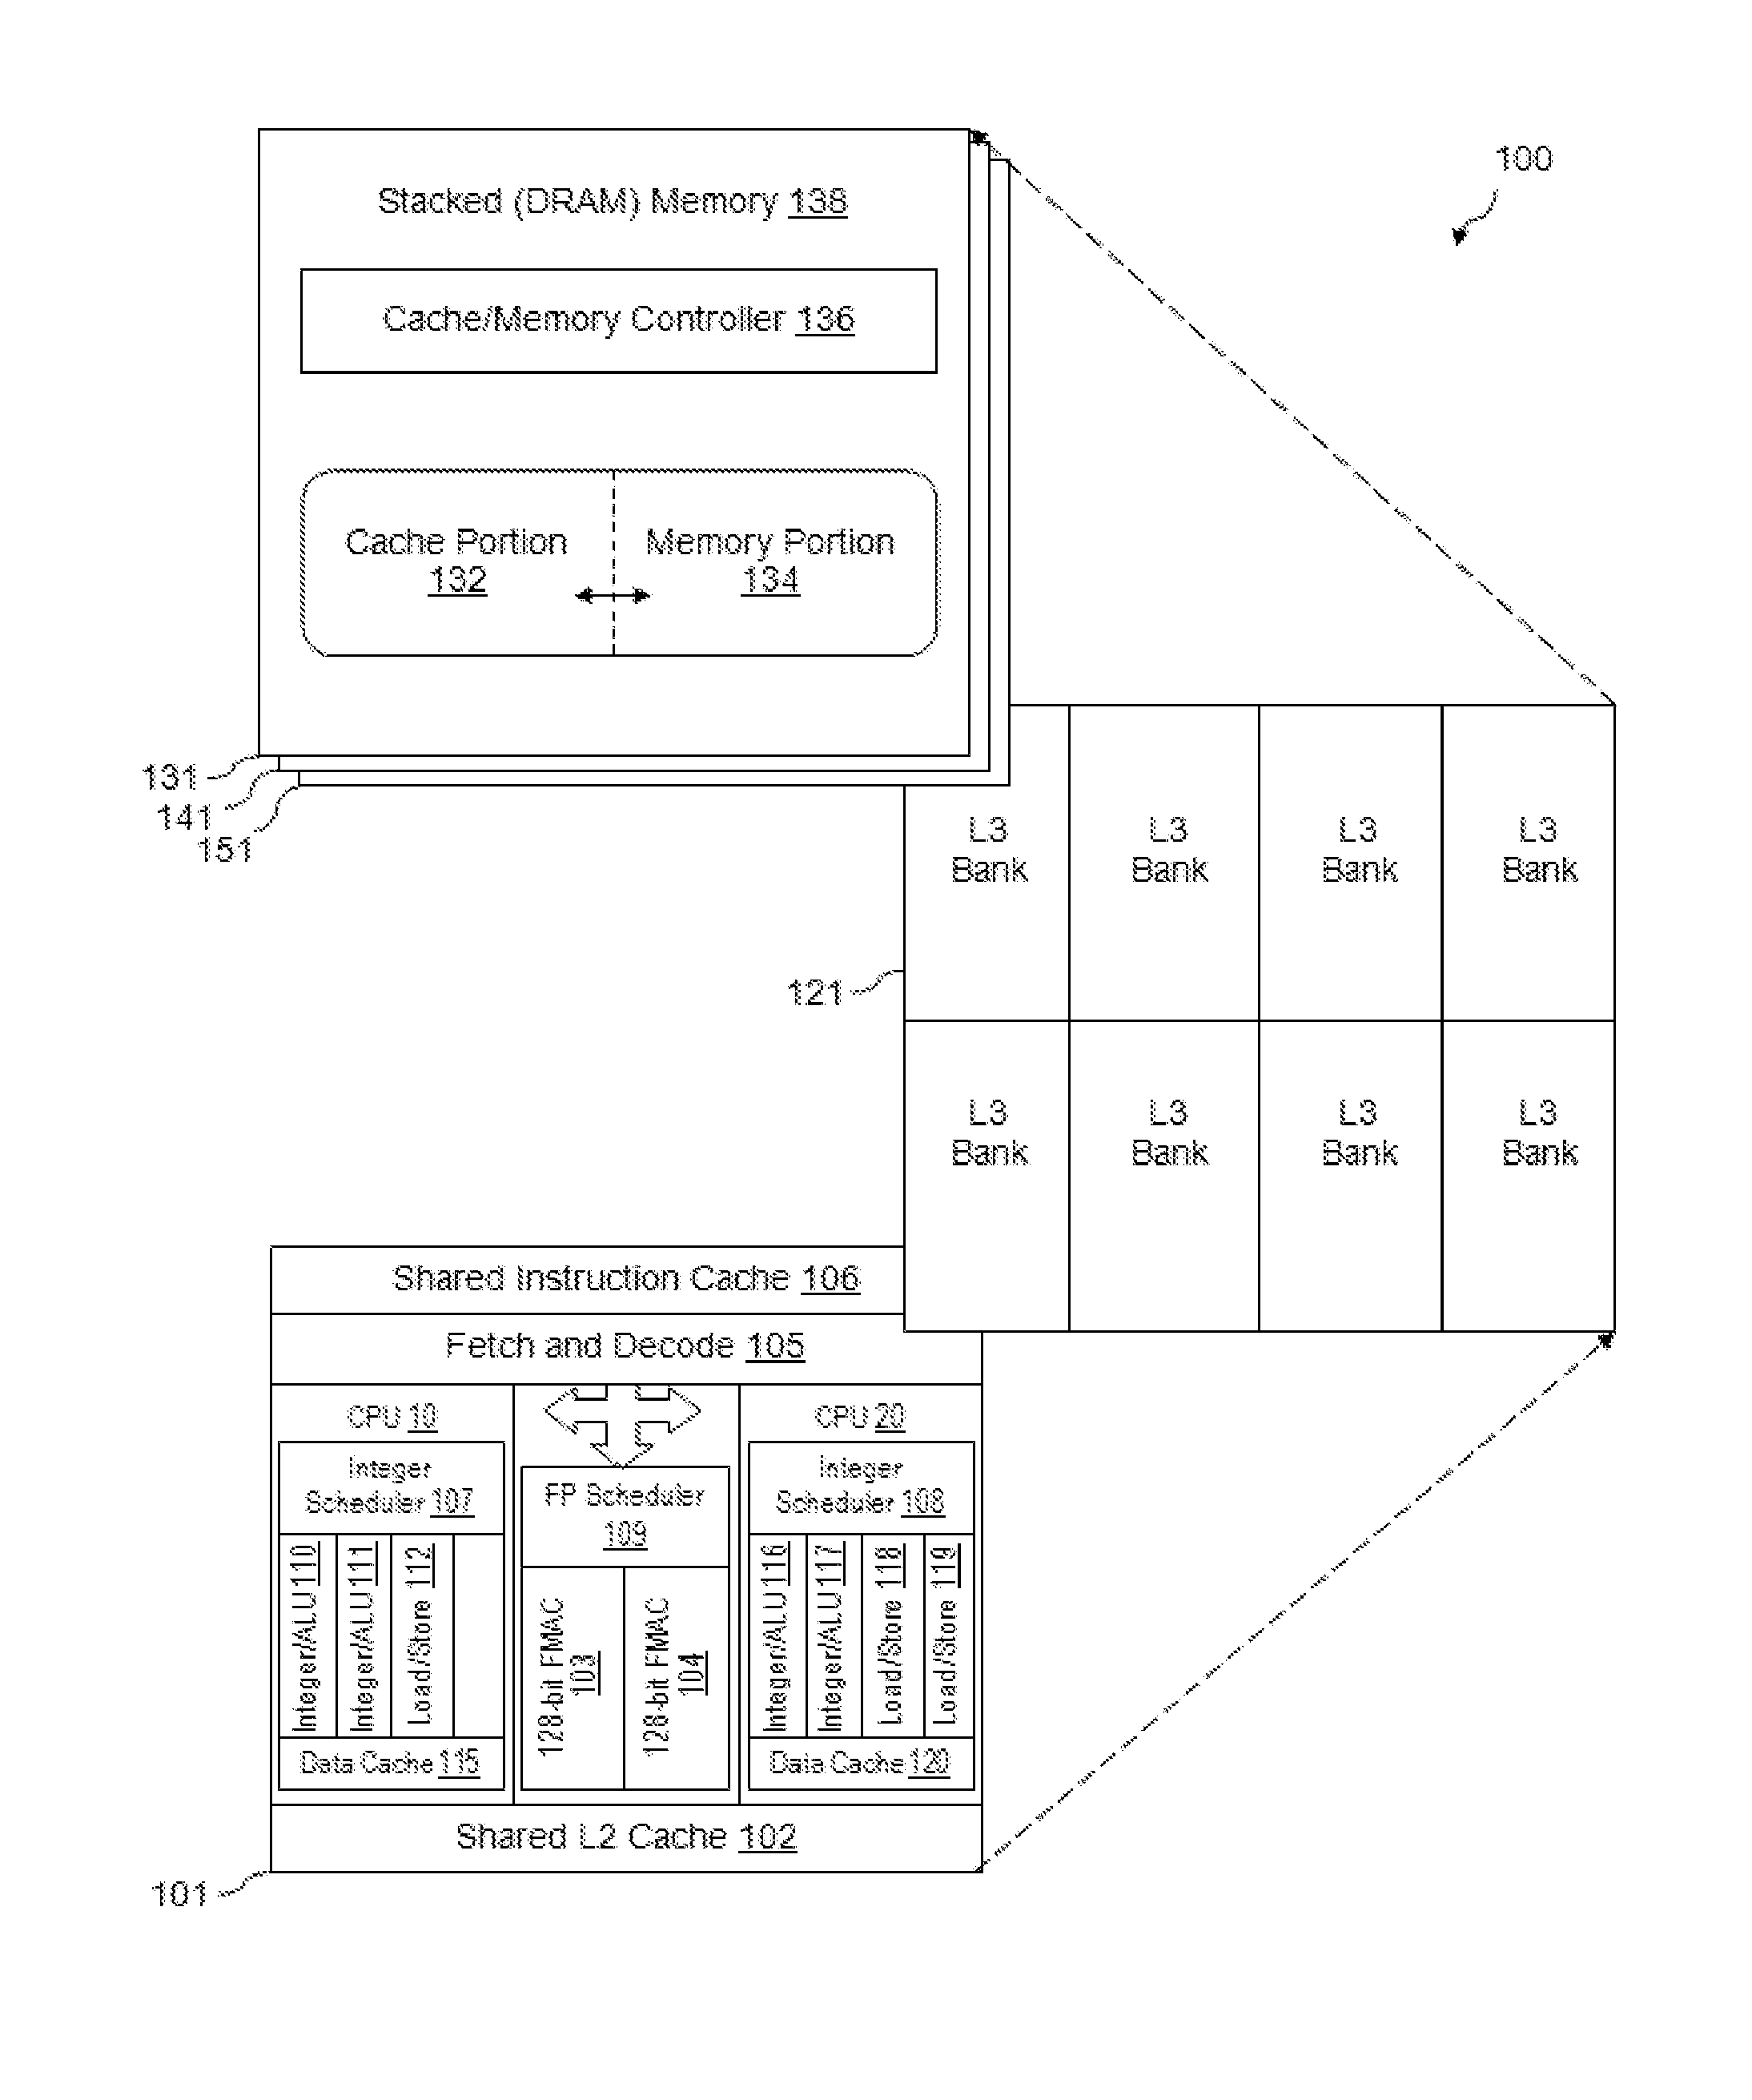 Polymorphic Stacked DRAM Memory Architecture